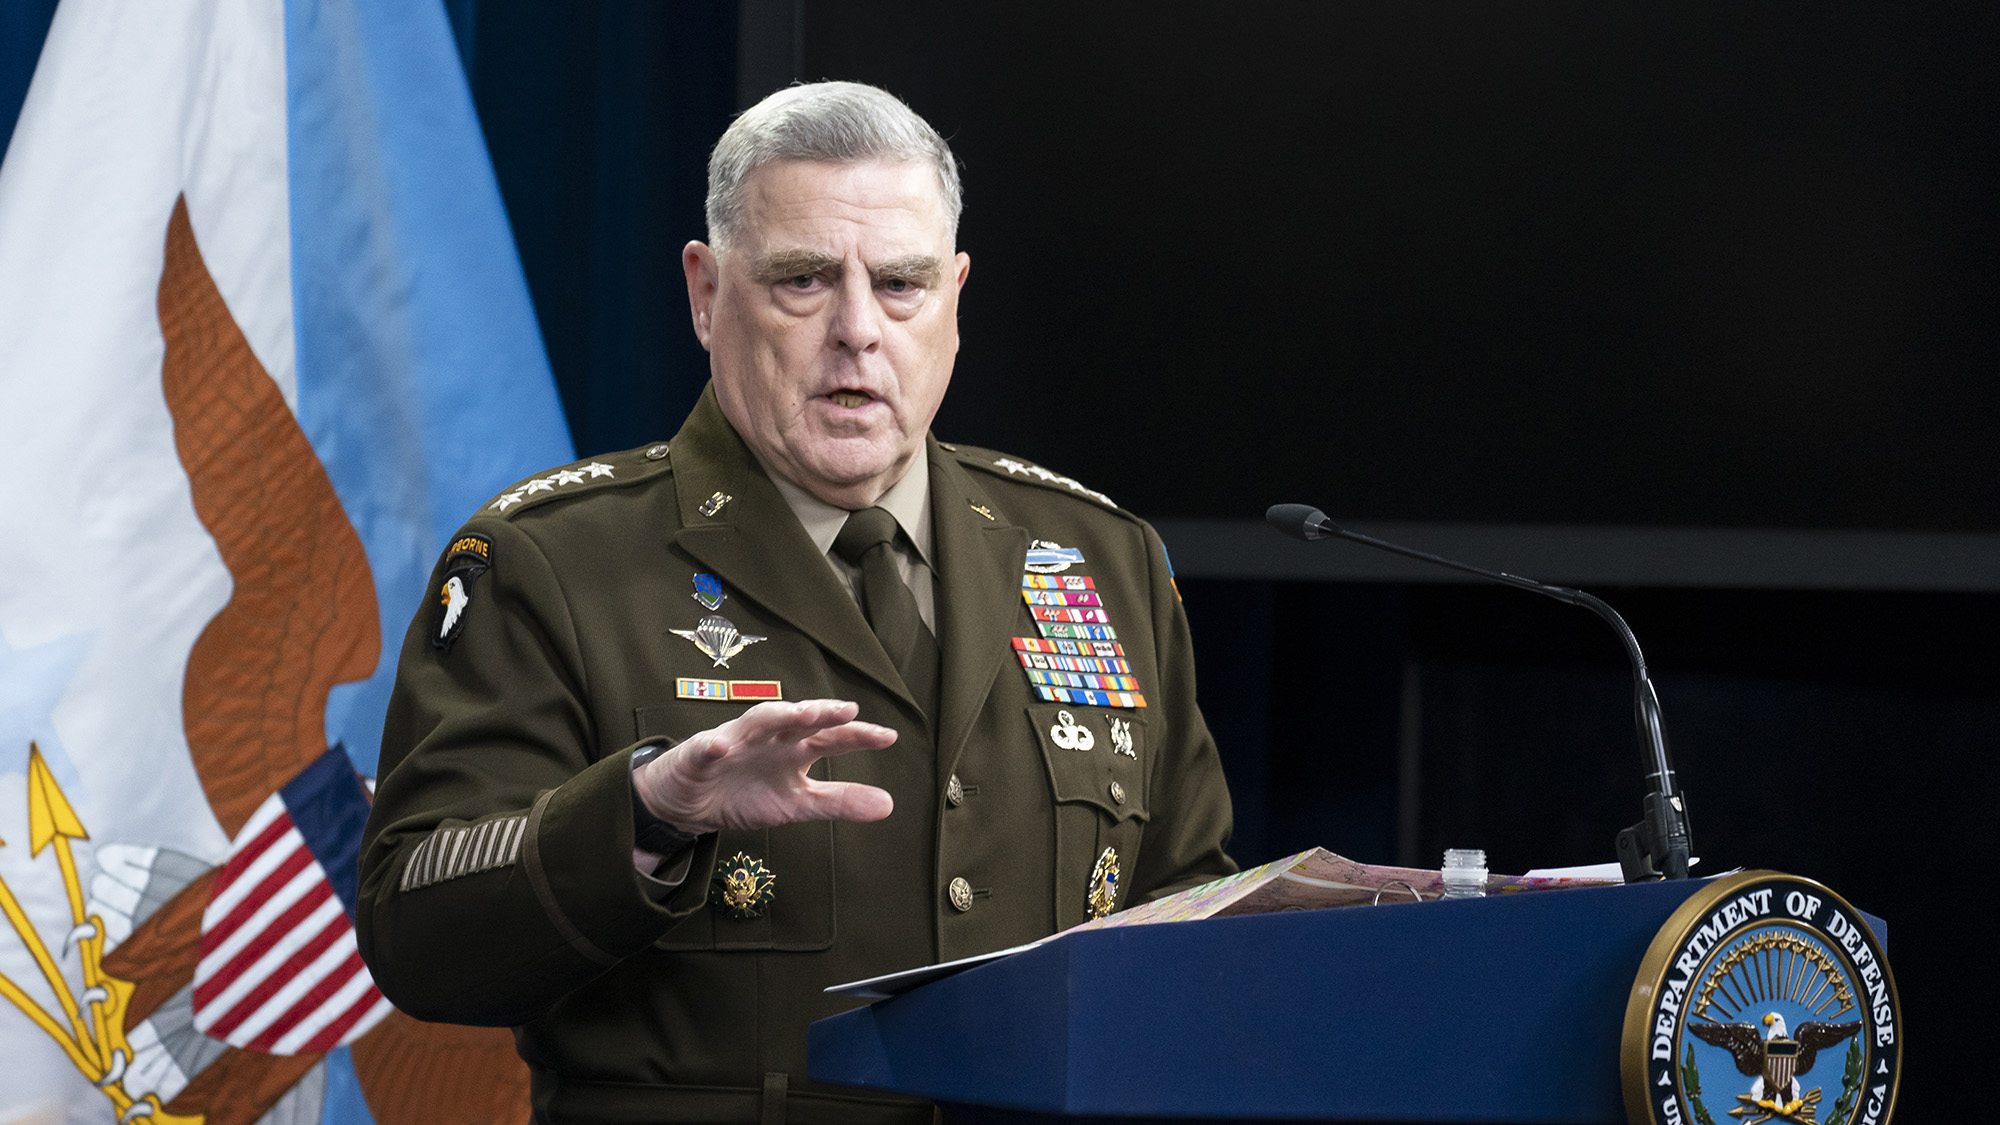 Chairman of the Joint Chiefs of Staff Mark Milley speaks during a media briefing at the Pentagon on Wednesday, July 20.